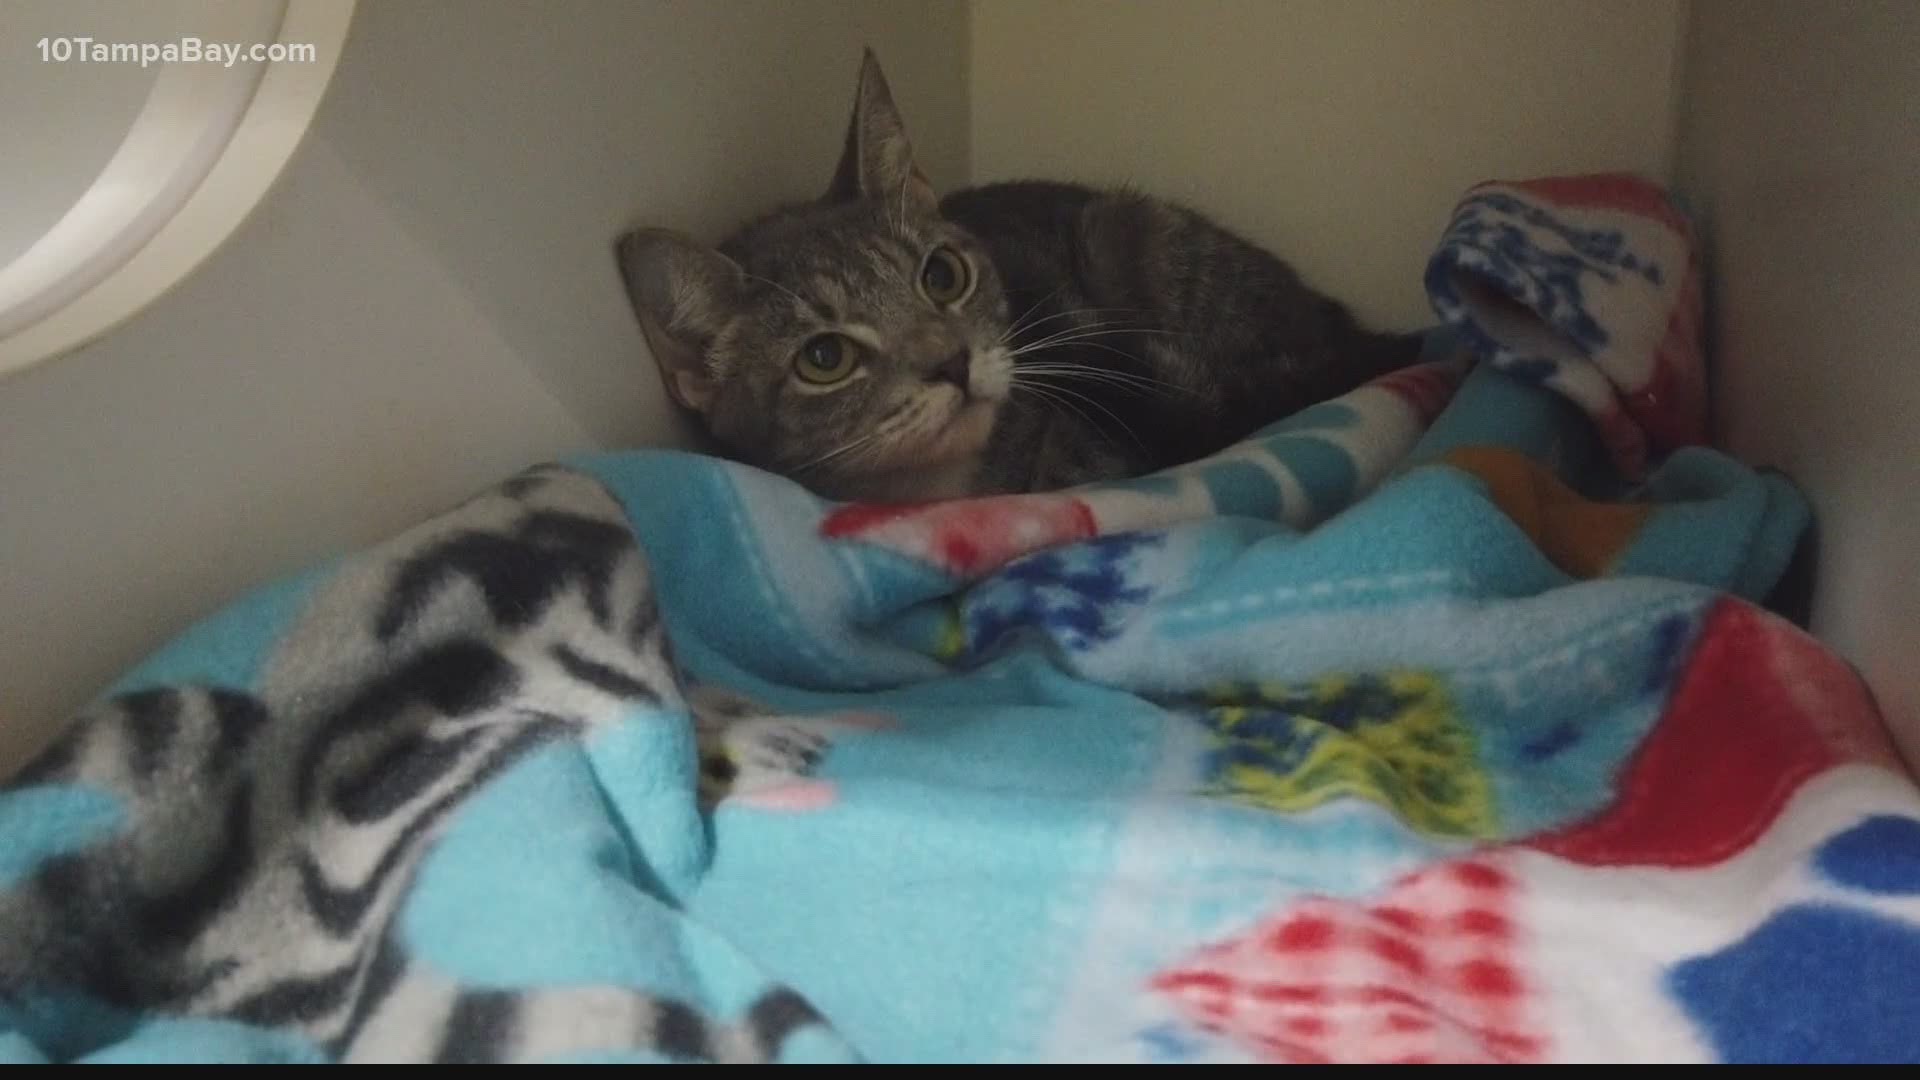 About 5 dozen cats were rescued from a hoarding situation a few weeks ago. However, most of them won't make good housepets, but they can be put to work.